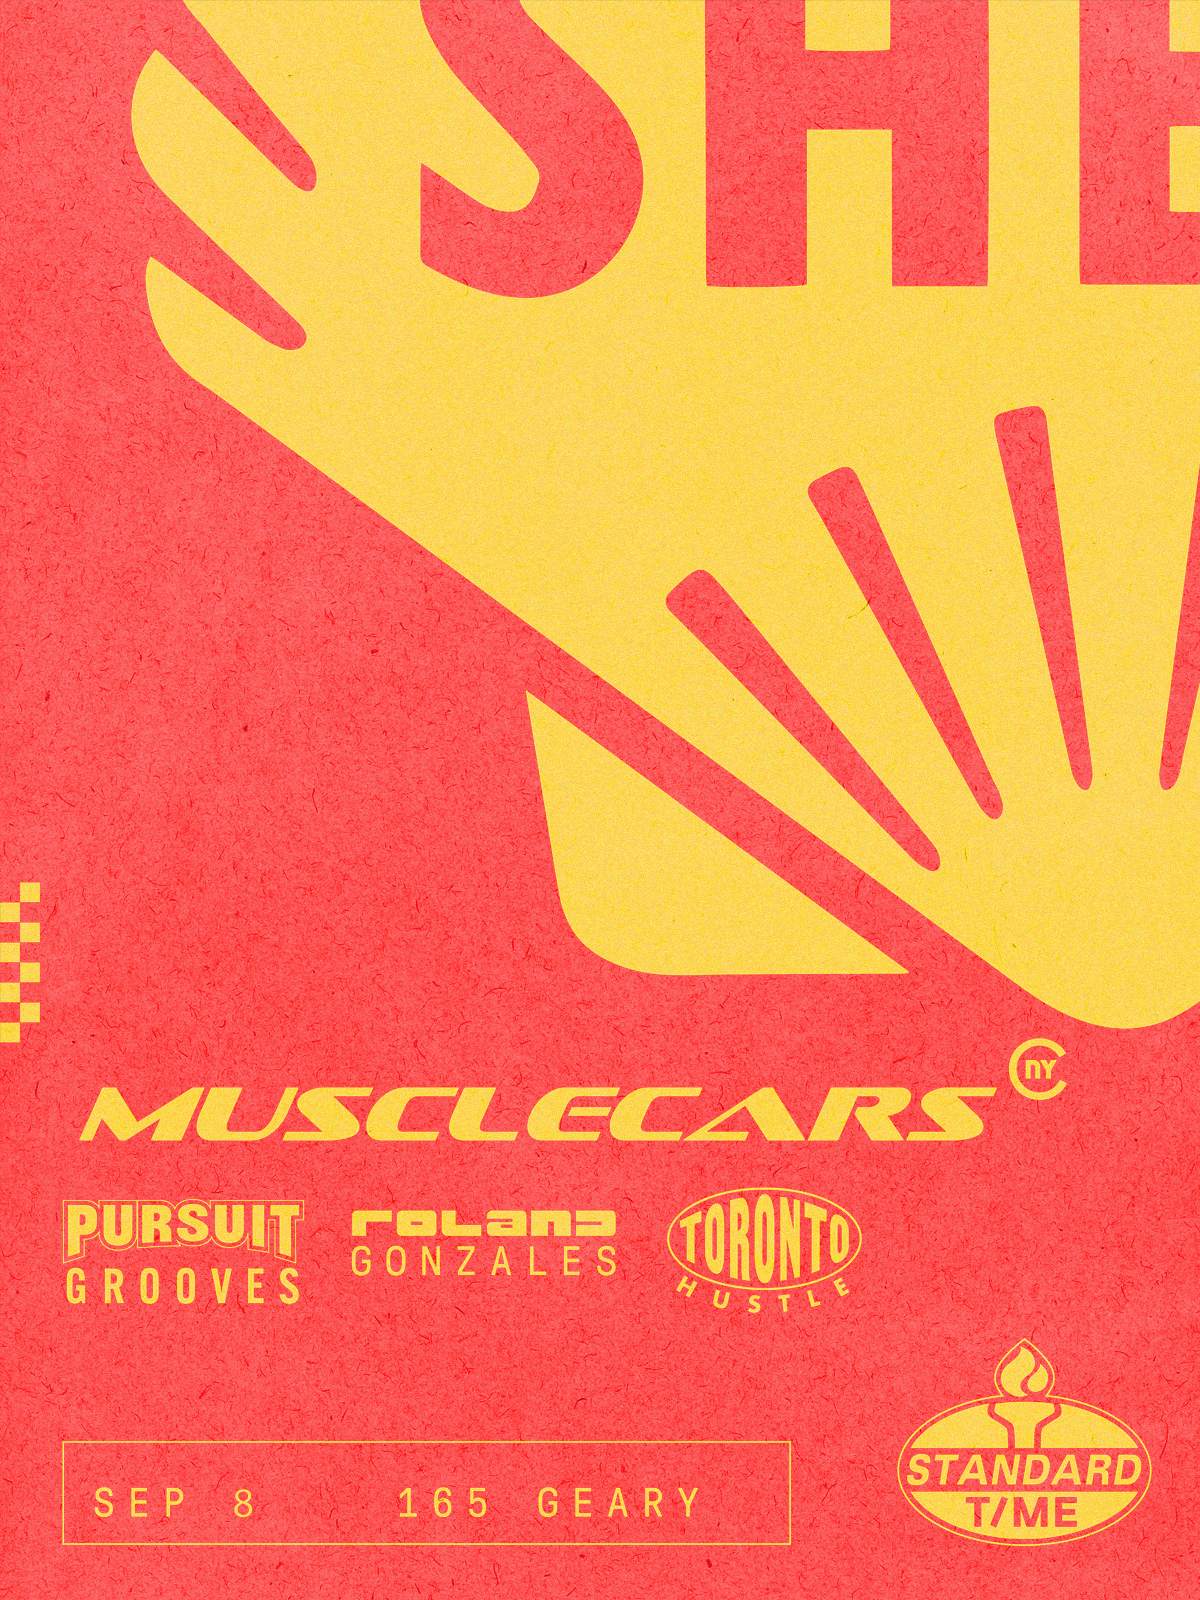 047: POSTPONED Musclecars, Roland Gonzales b2b Toronto Hustle and Pursuit Grooves - Página trasera